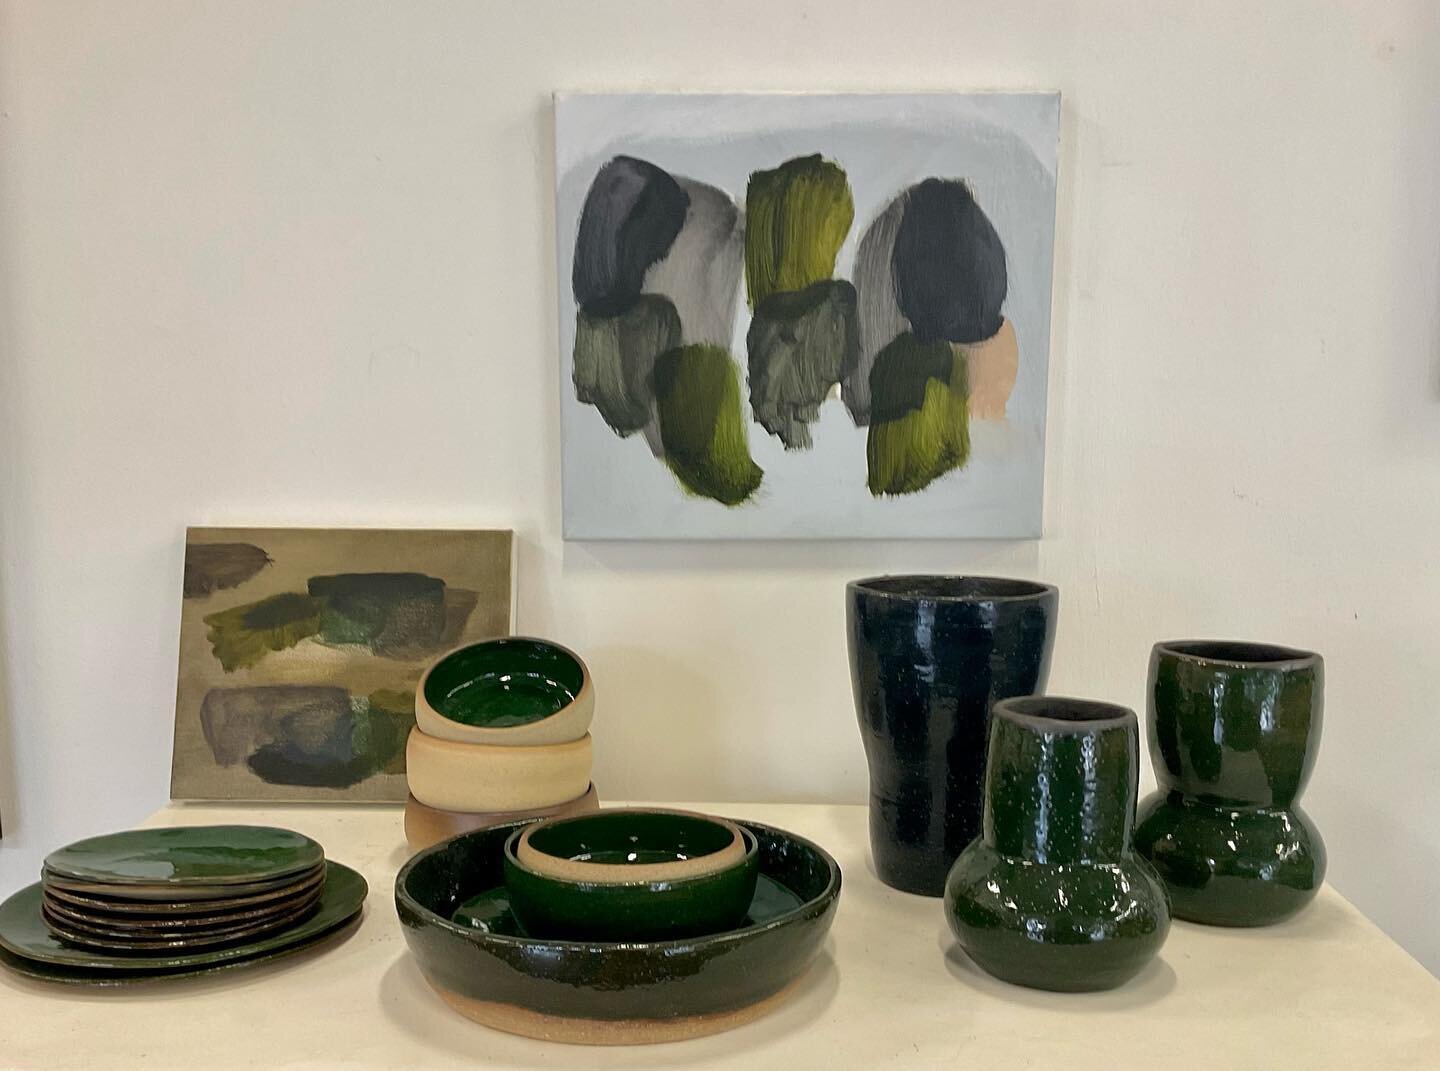 Just a arrived new paintings from Michael Cusack. Ceramics by Deanna Belluzzo